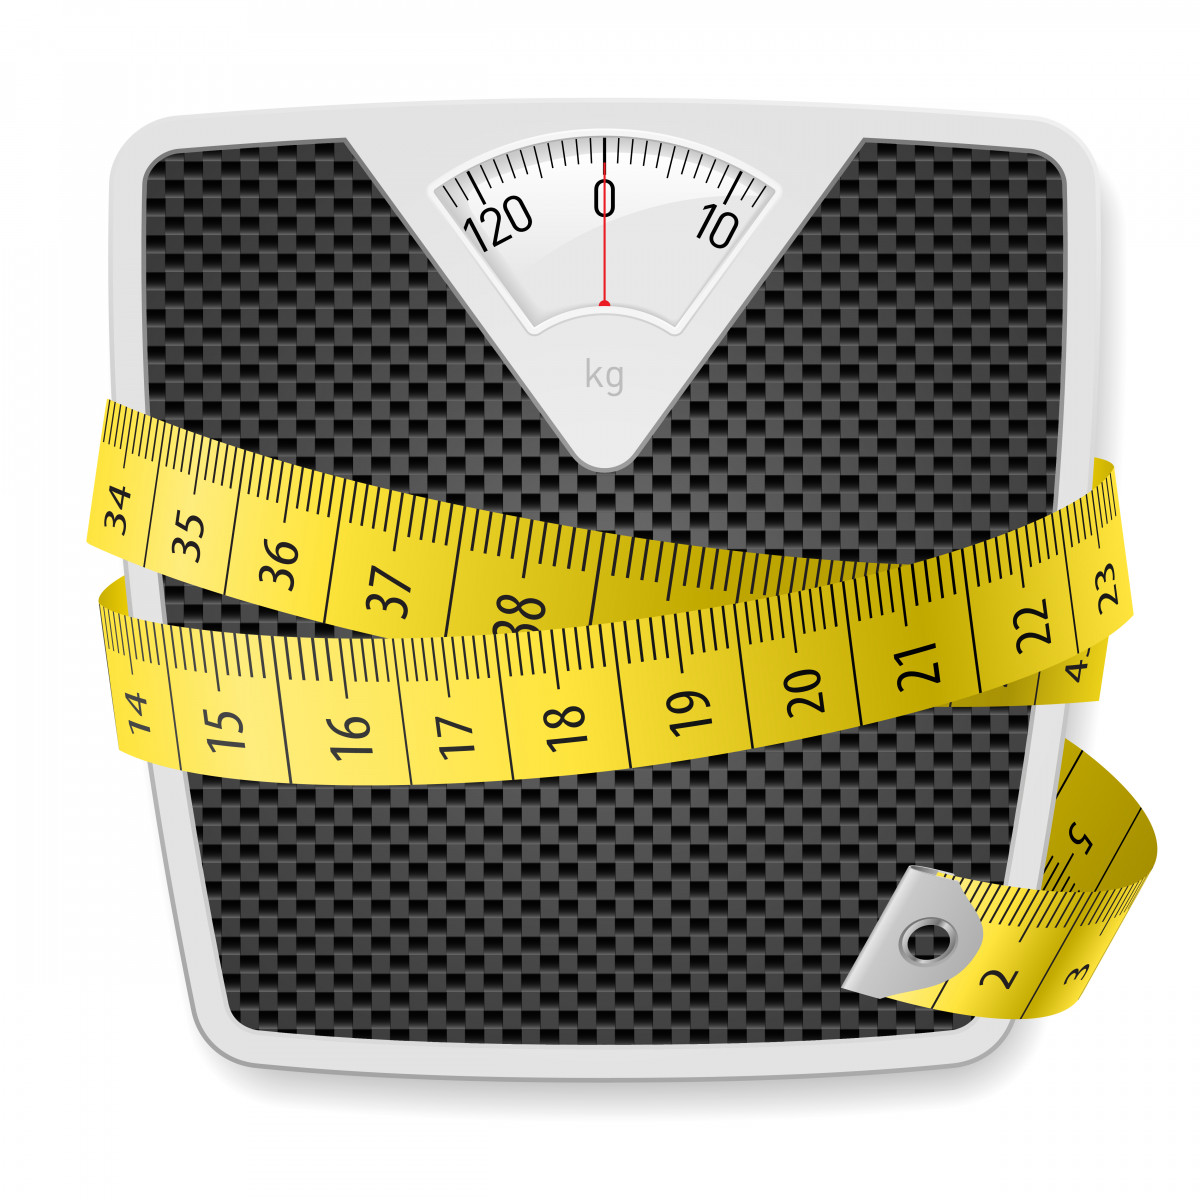 Than loss better phentermine weight